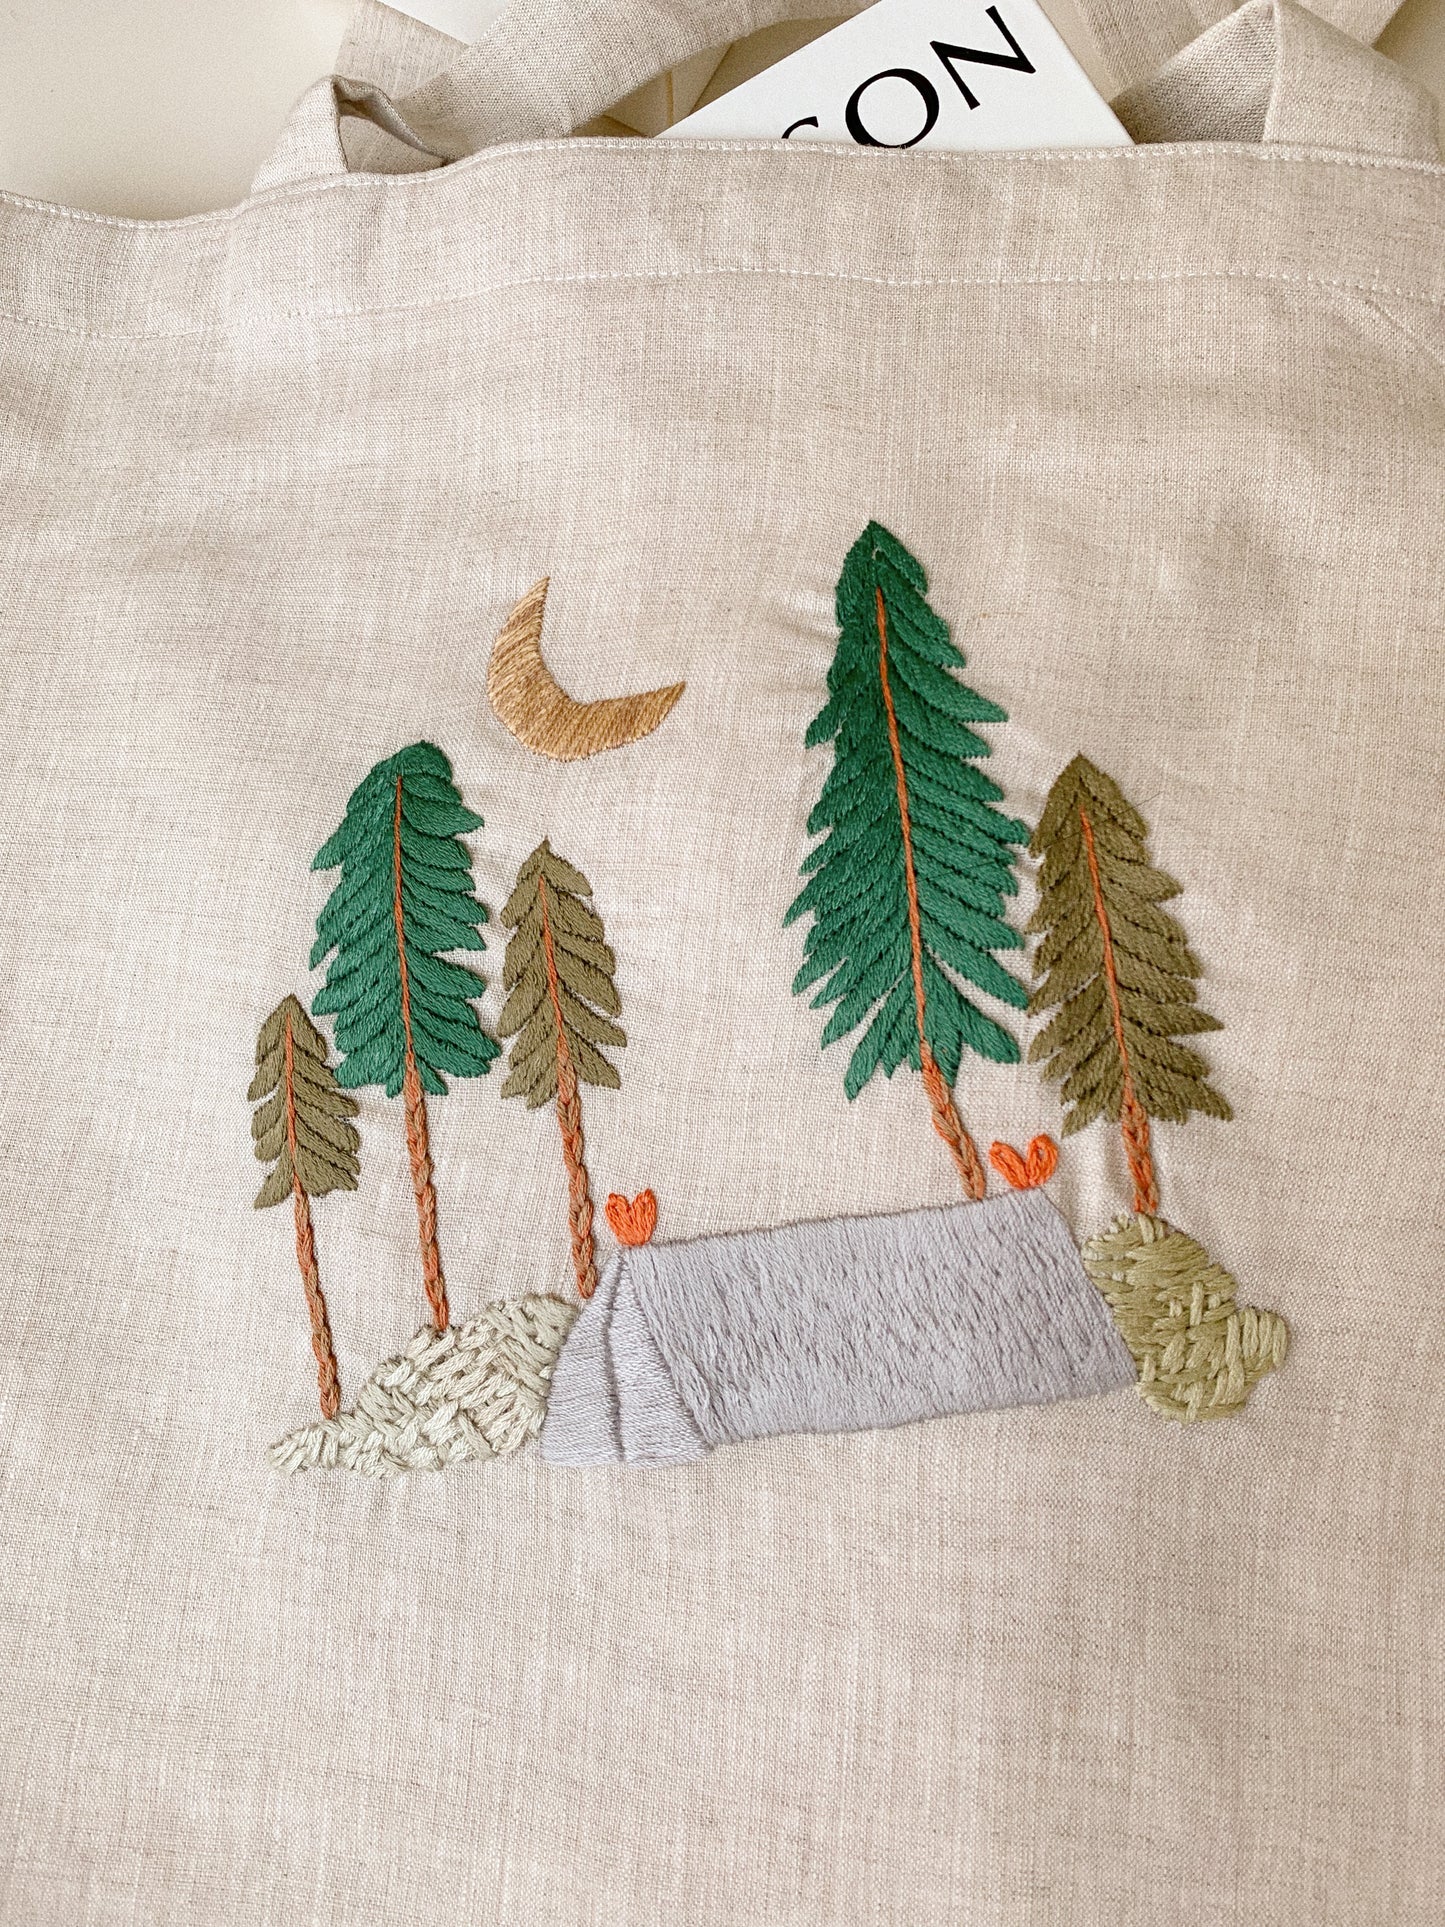 Hand Embroidery Linen Canvas Tote Bag is Beautiful and unique tote bag made from high-quality linen canvas with hand-stitched forest embroidery